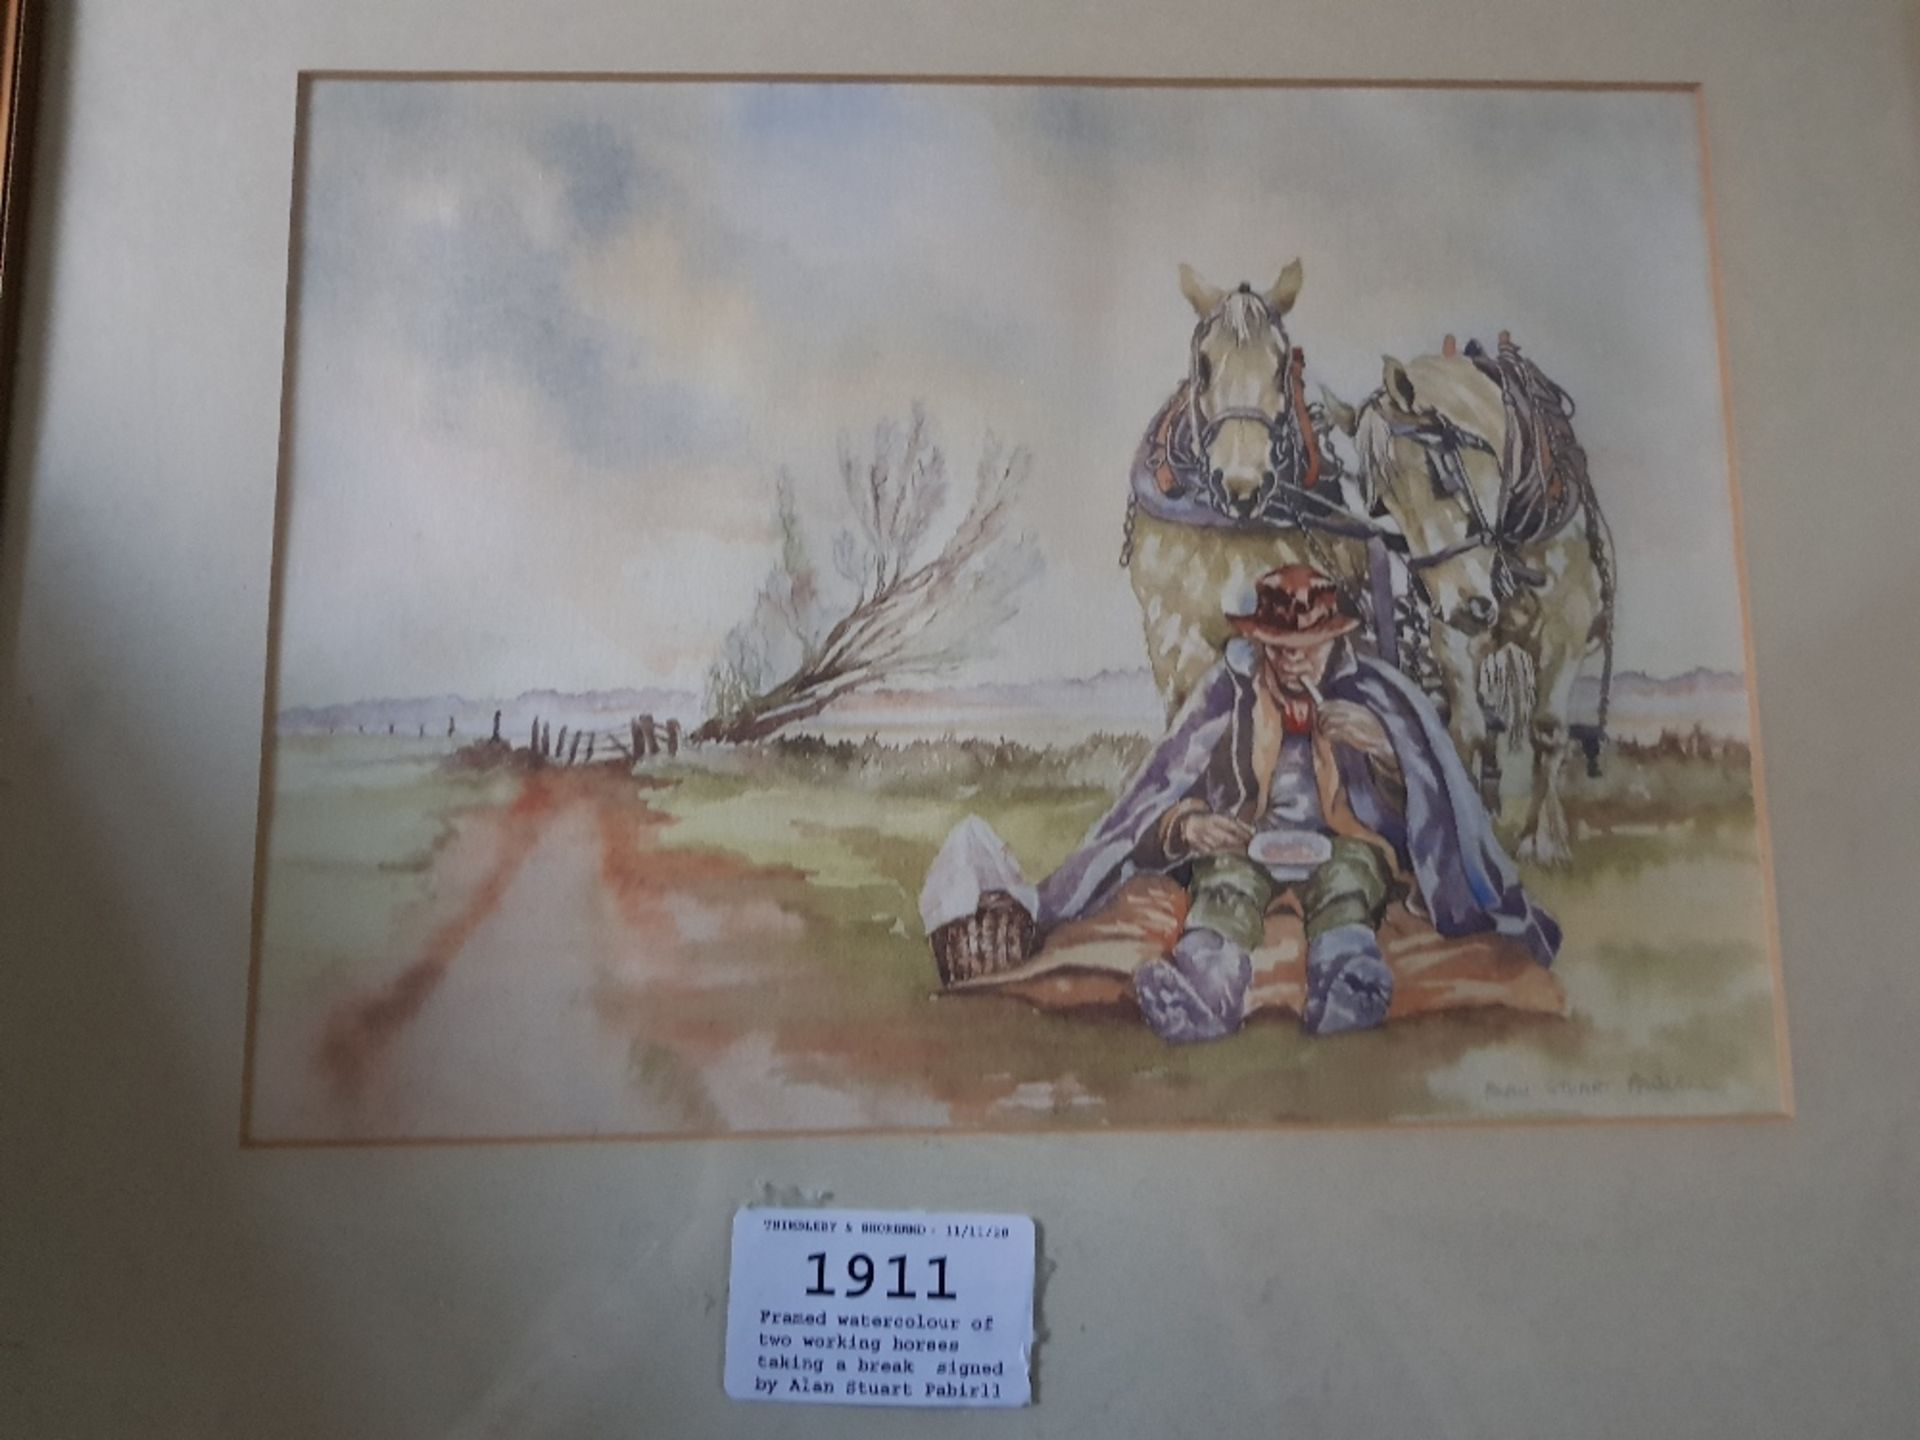 Framed watercolour of two working horses taking a break, signed by Alan Stuart Pabirll